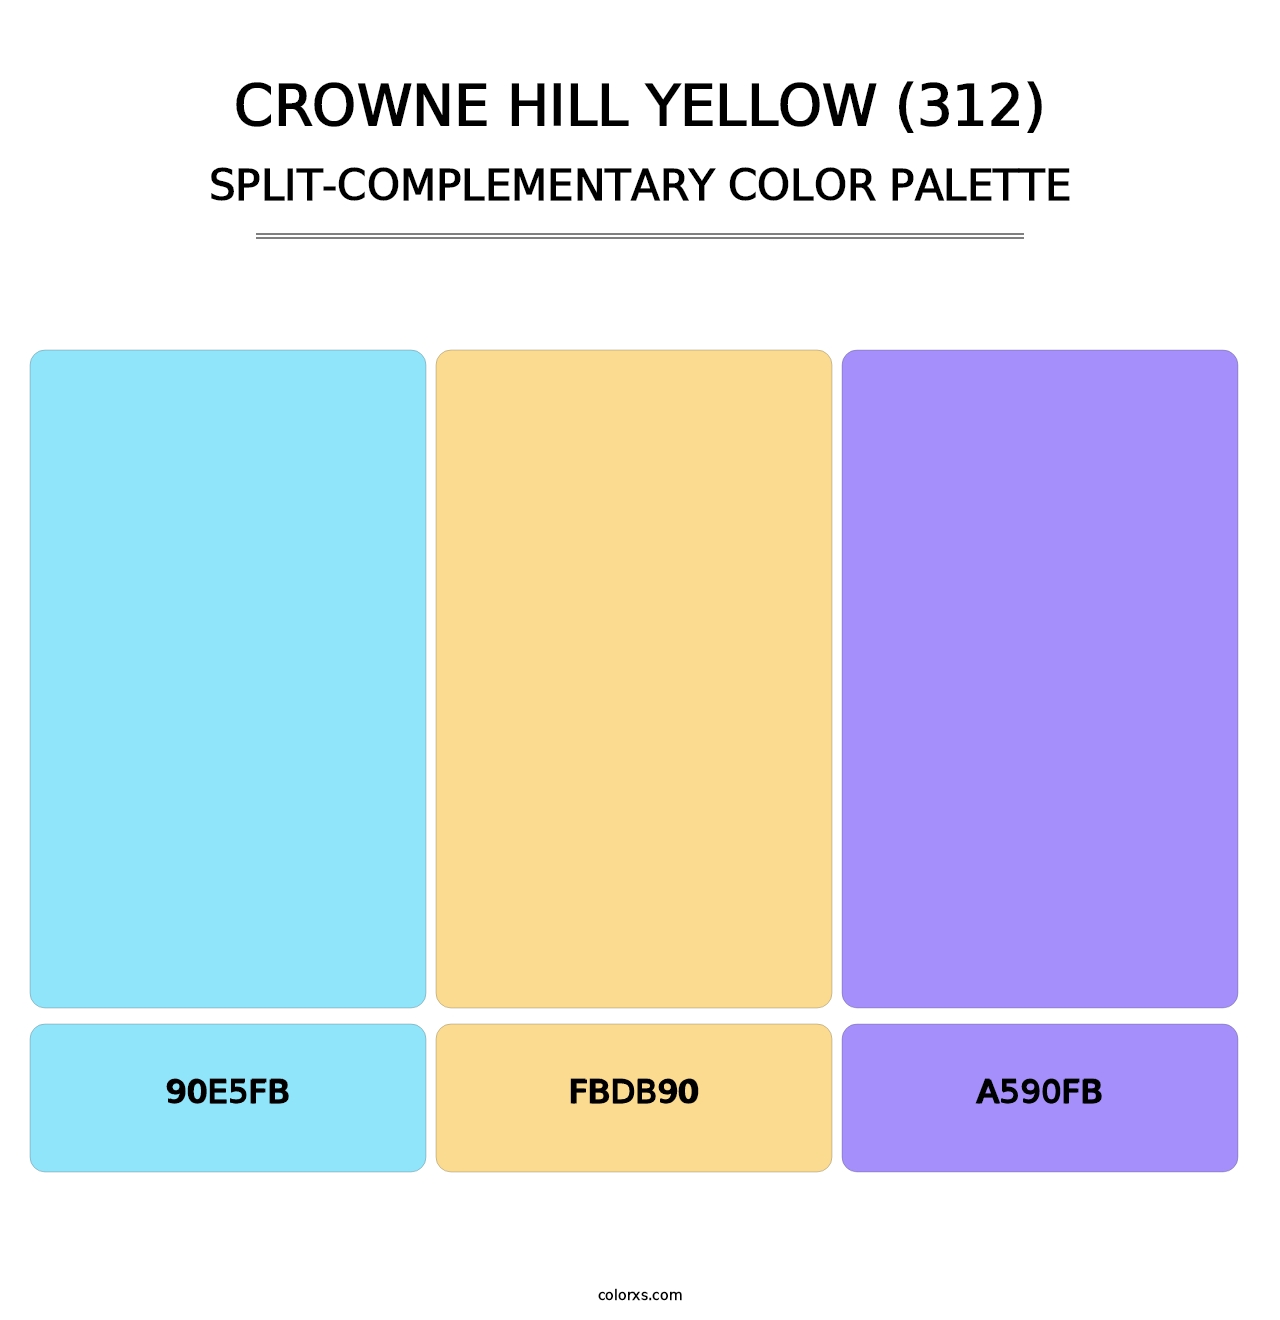 Crowne Hill Yellow (312) - Split-Complementary Color Palette